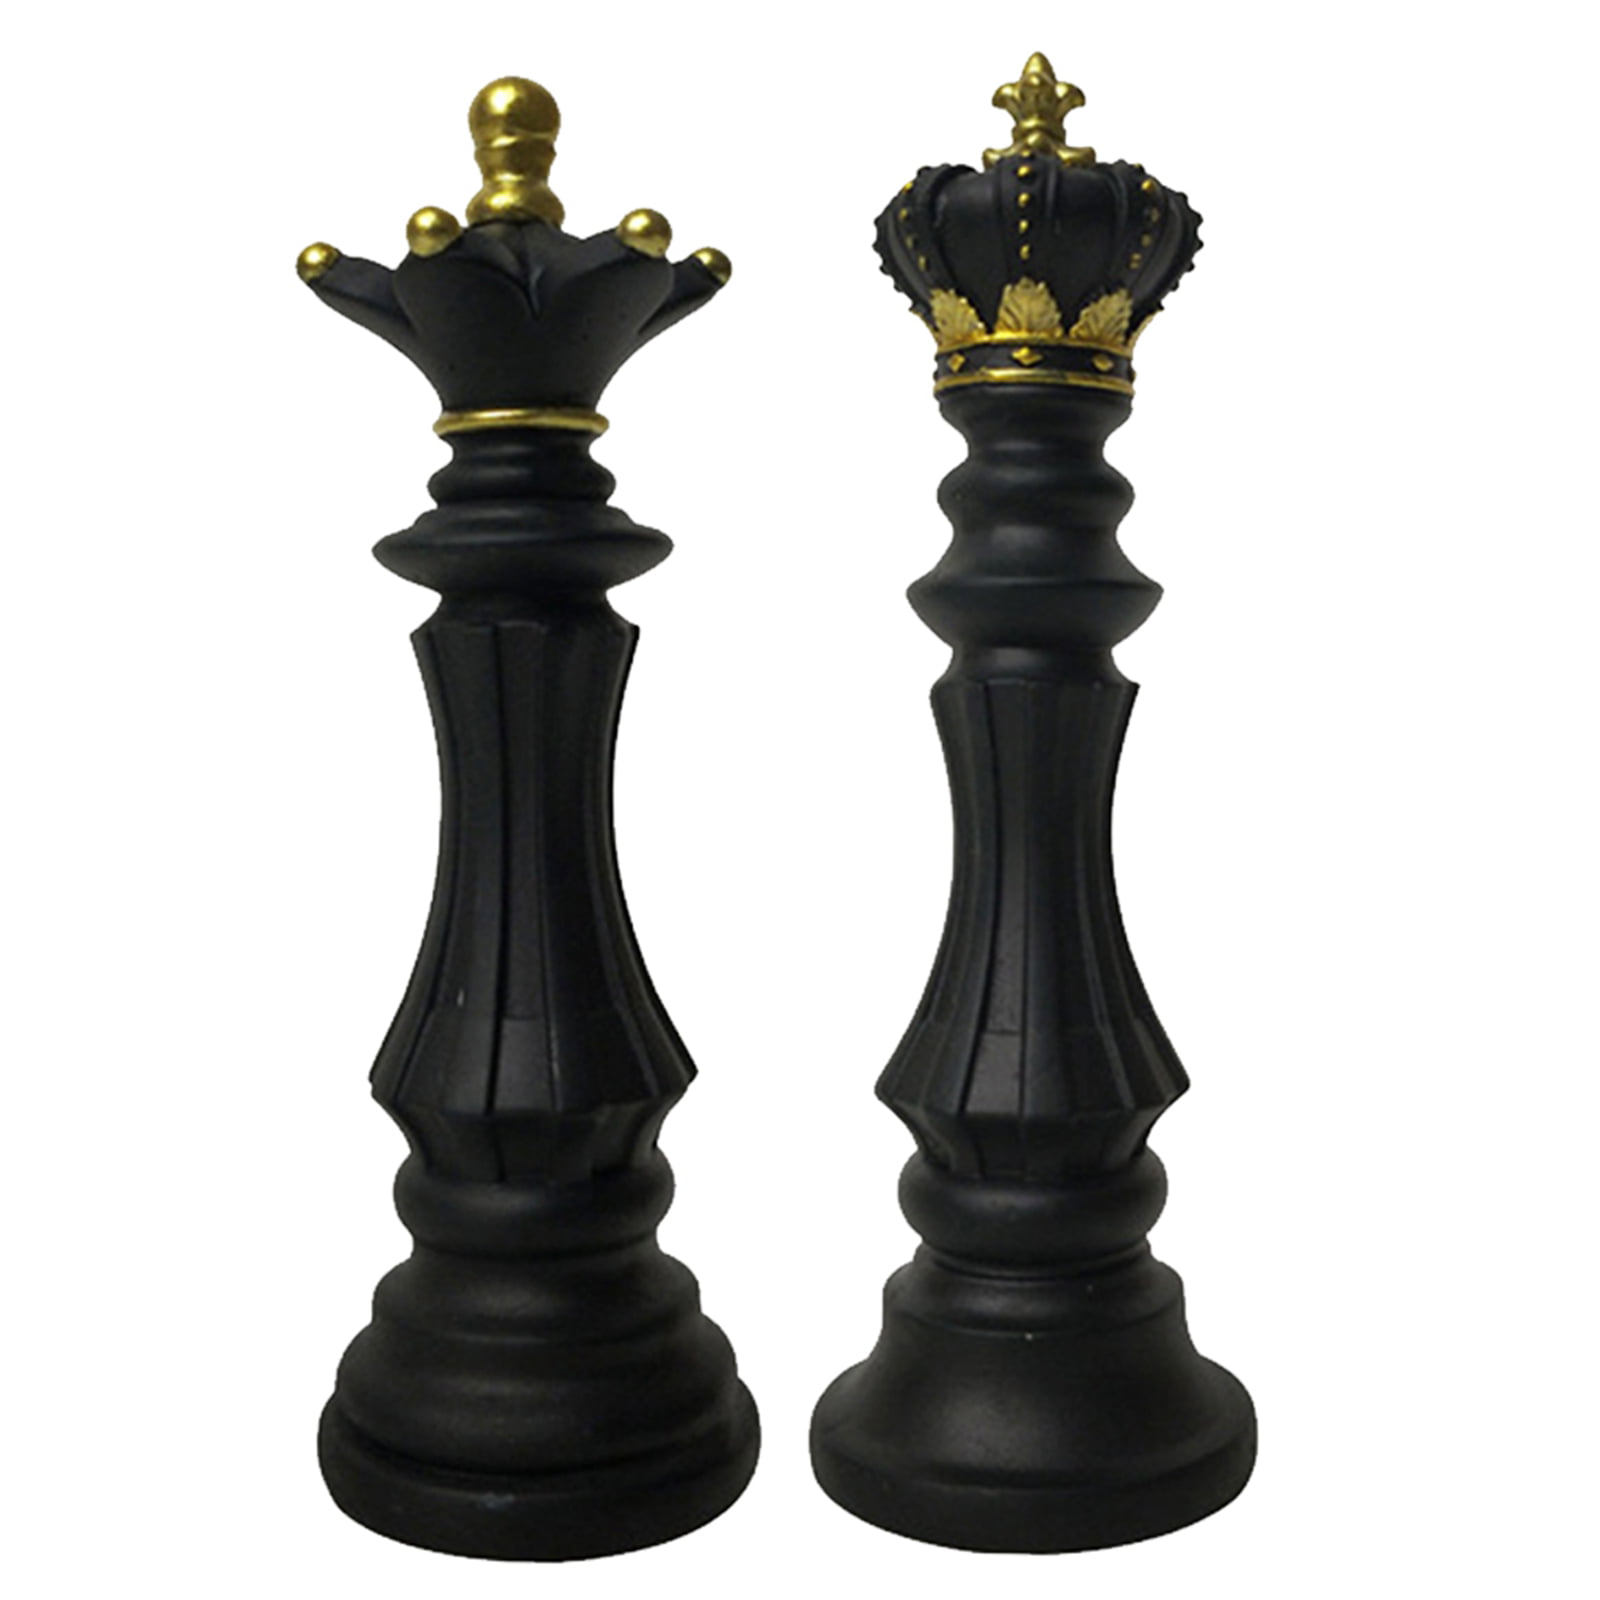 Chess Pieces Statue Sculpture Ornament Resin Craft Home Decor Art Table 